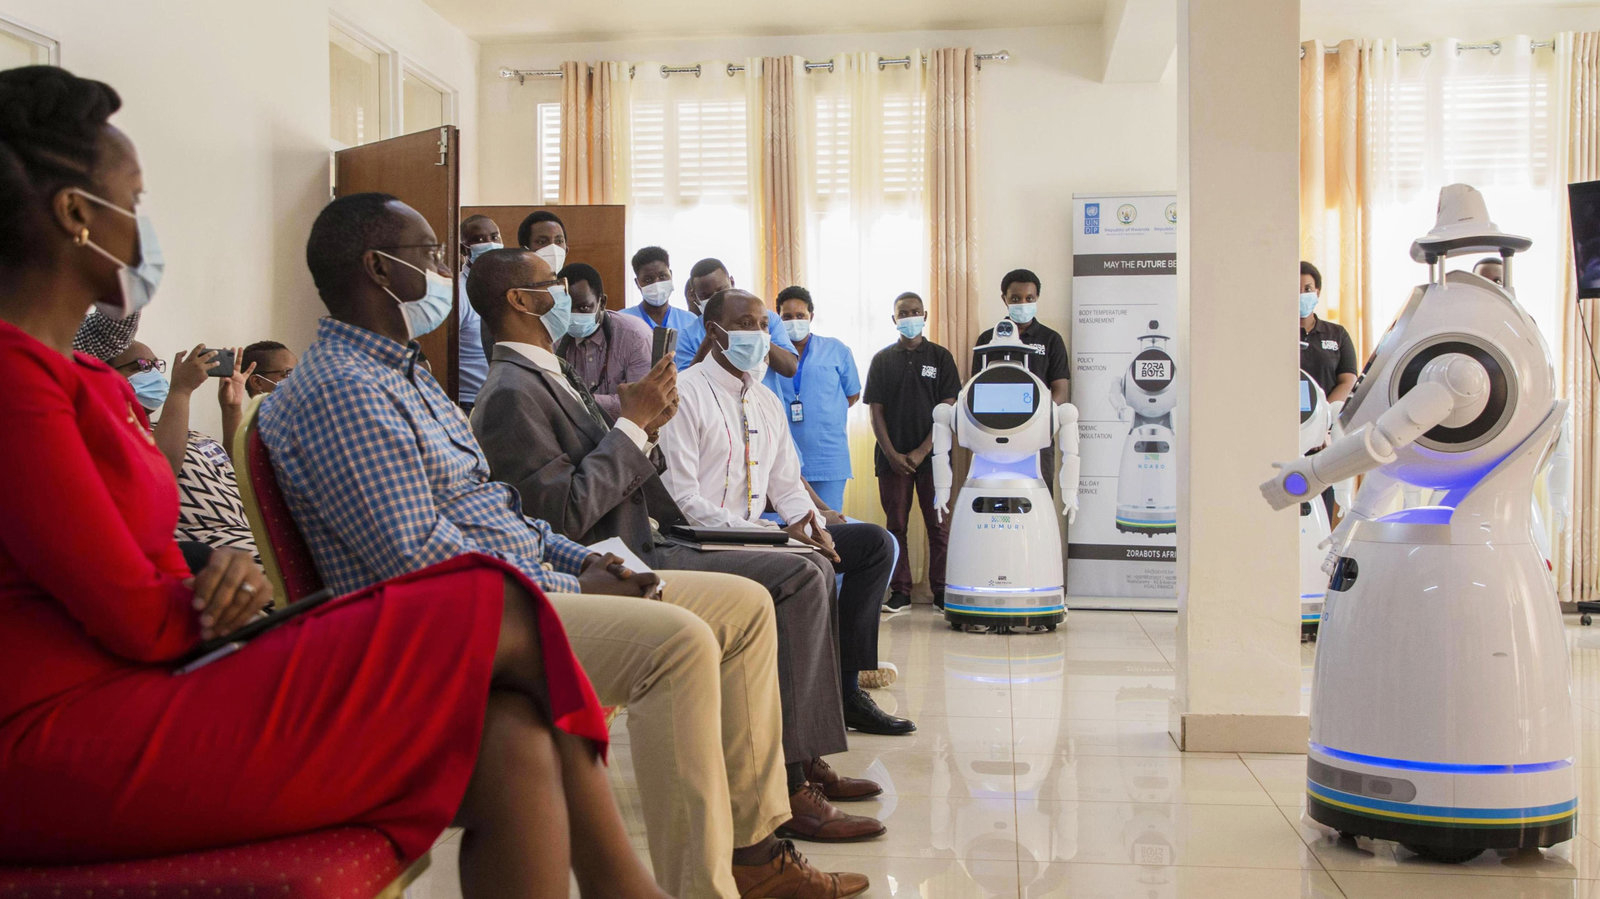 A robot introduces itself to patients in Kigali, Rwanda. The robots, used in Rwanda's treatment centers, can screen people for COVID-19 and deliver food and medication, among other tasks.